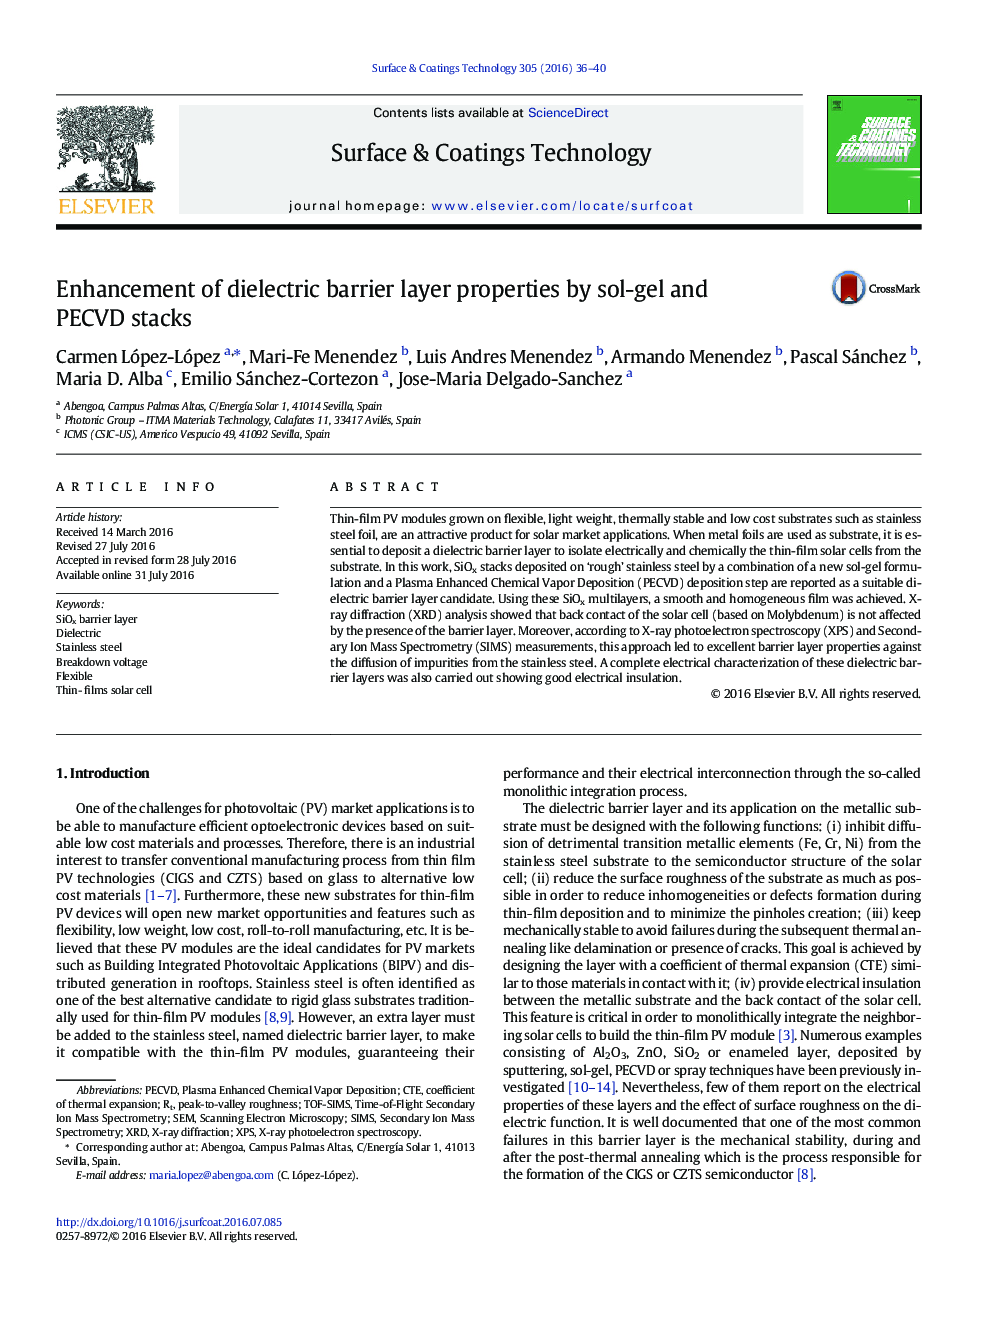 Enhancement of dielectric barrier layer properties by sol-gel and PECVD stacks